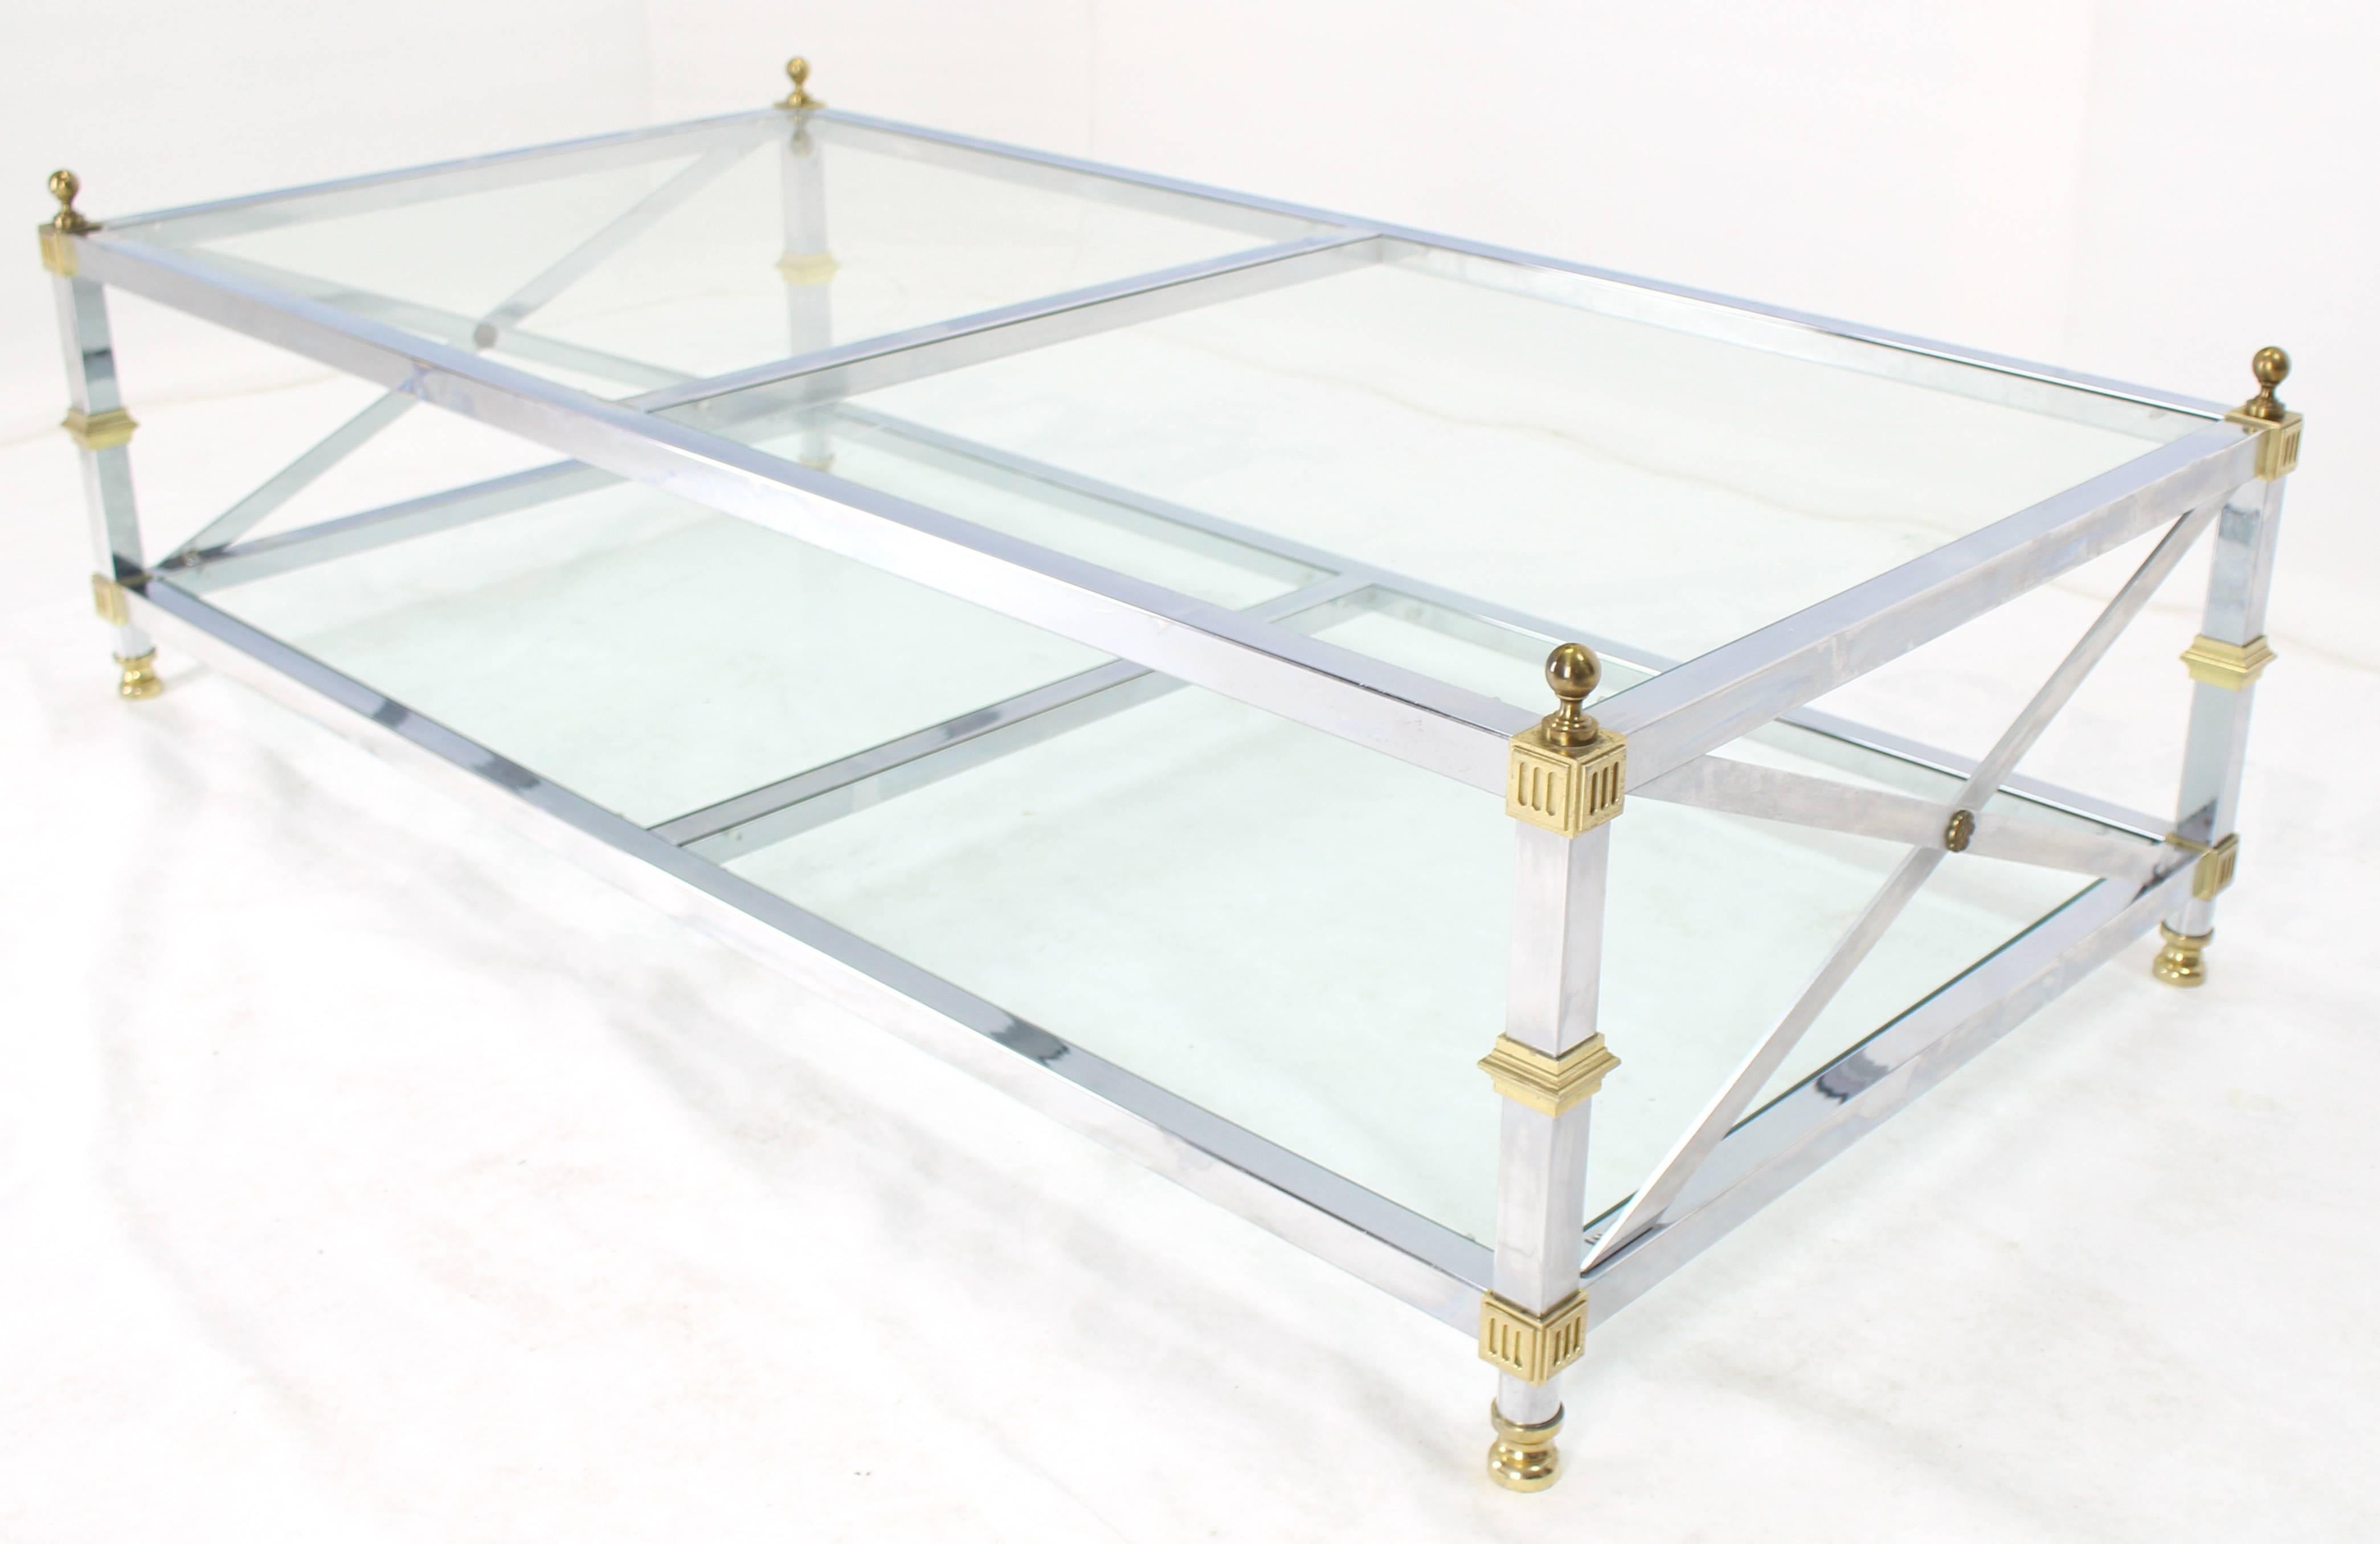 Chrome Brass Glass Two-Tier Coffee Table with X-Stretchers In Excellent Condition For Sale In Rockaway, NJ